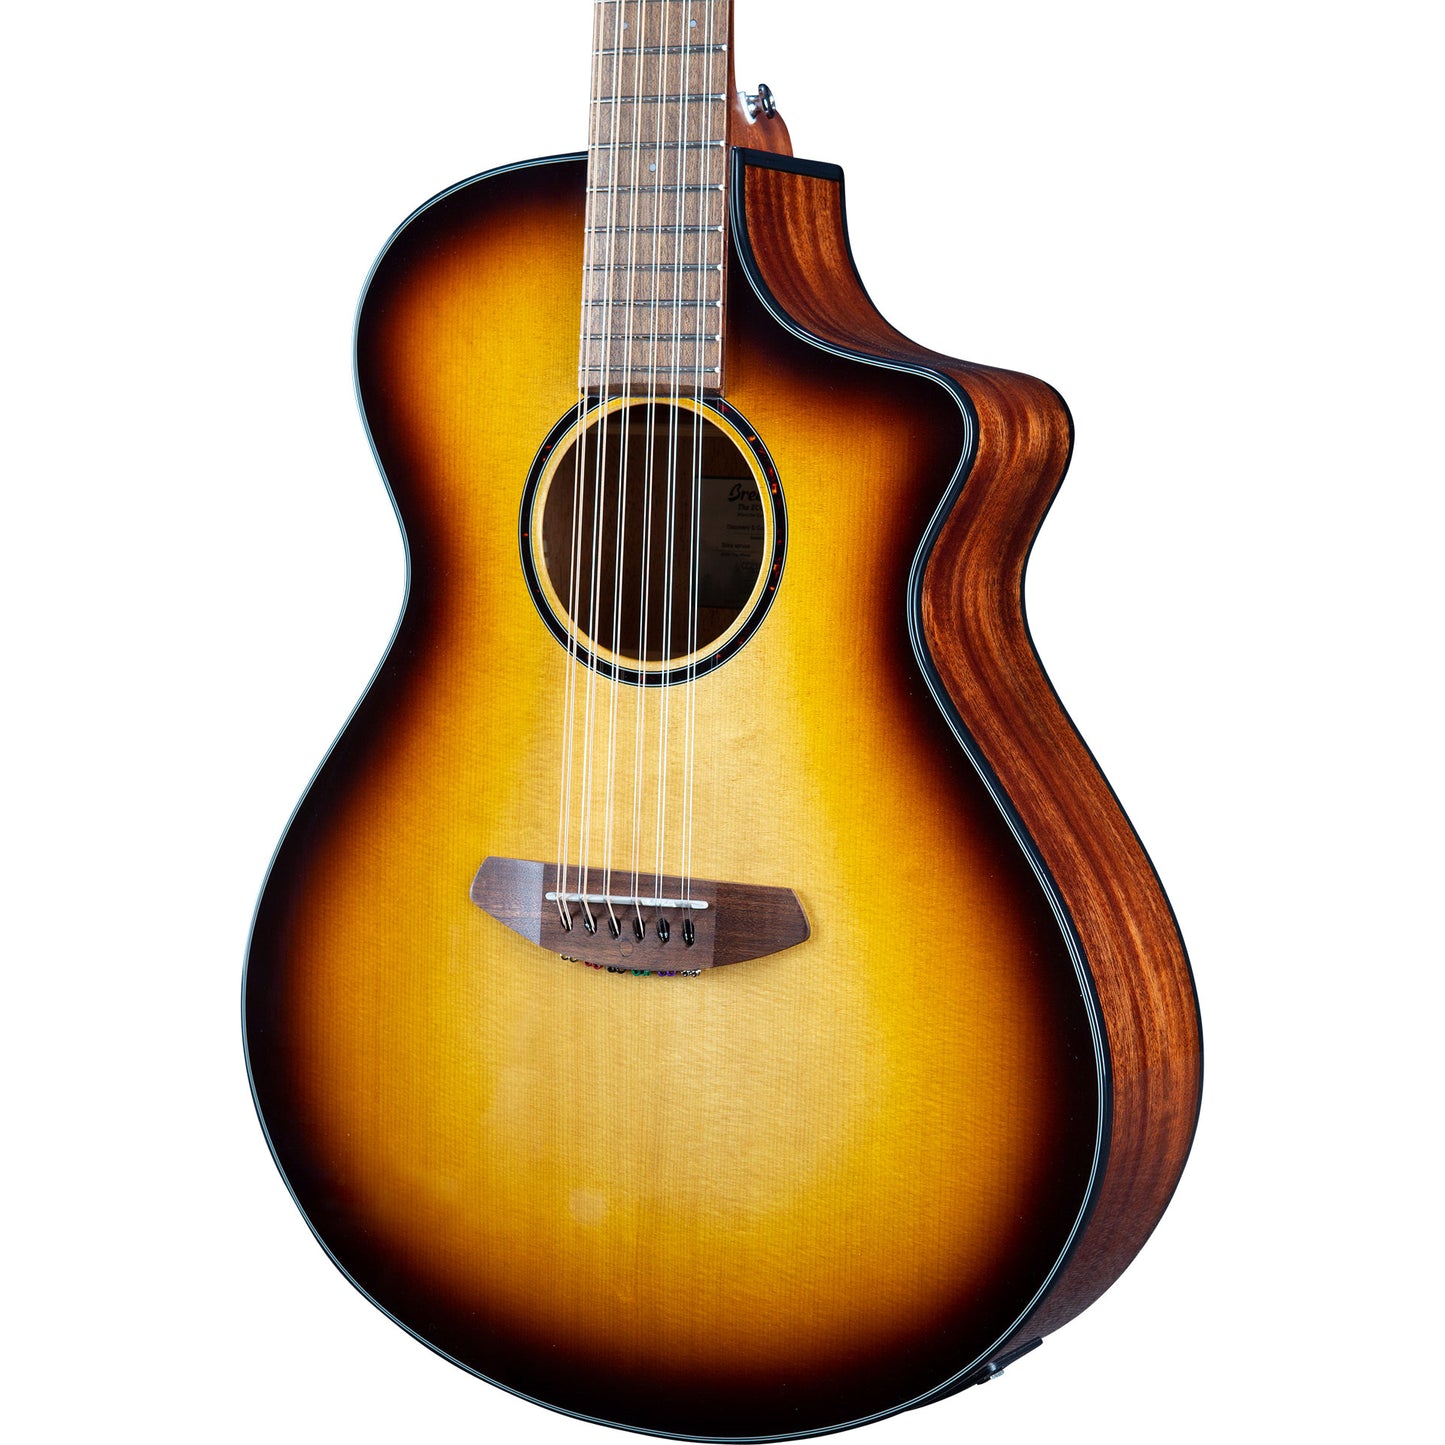 Breedlove Discovery S Concert Edgeburst 12-String CE Acoustic-Electric Guitar